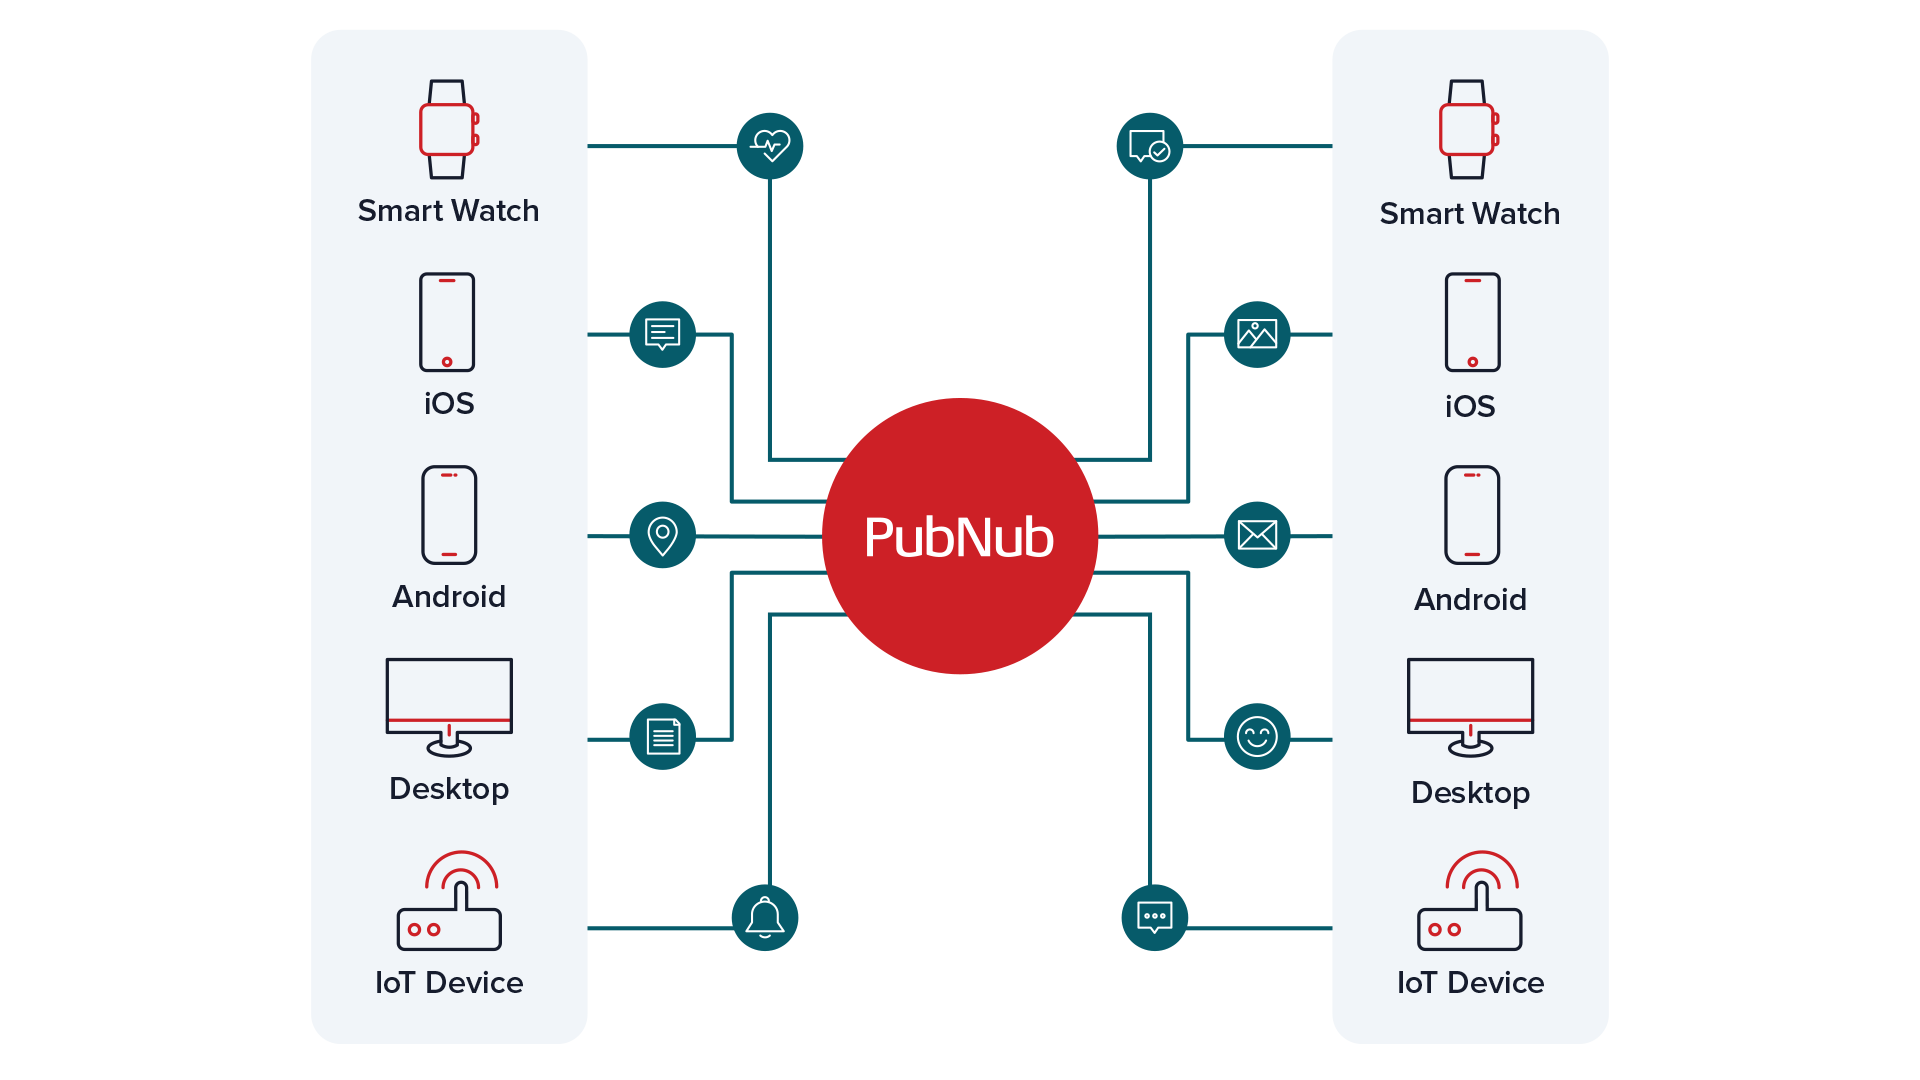 Diagram illustrating the PubNub real-time messaging infrastructure with various connected platforms such as smart watches, iOS devices, Android devices, desktops, and IoT devices.